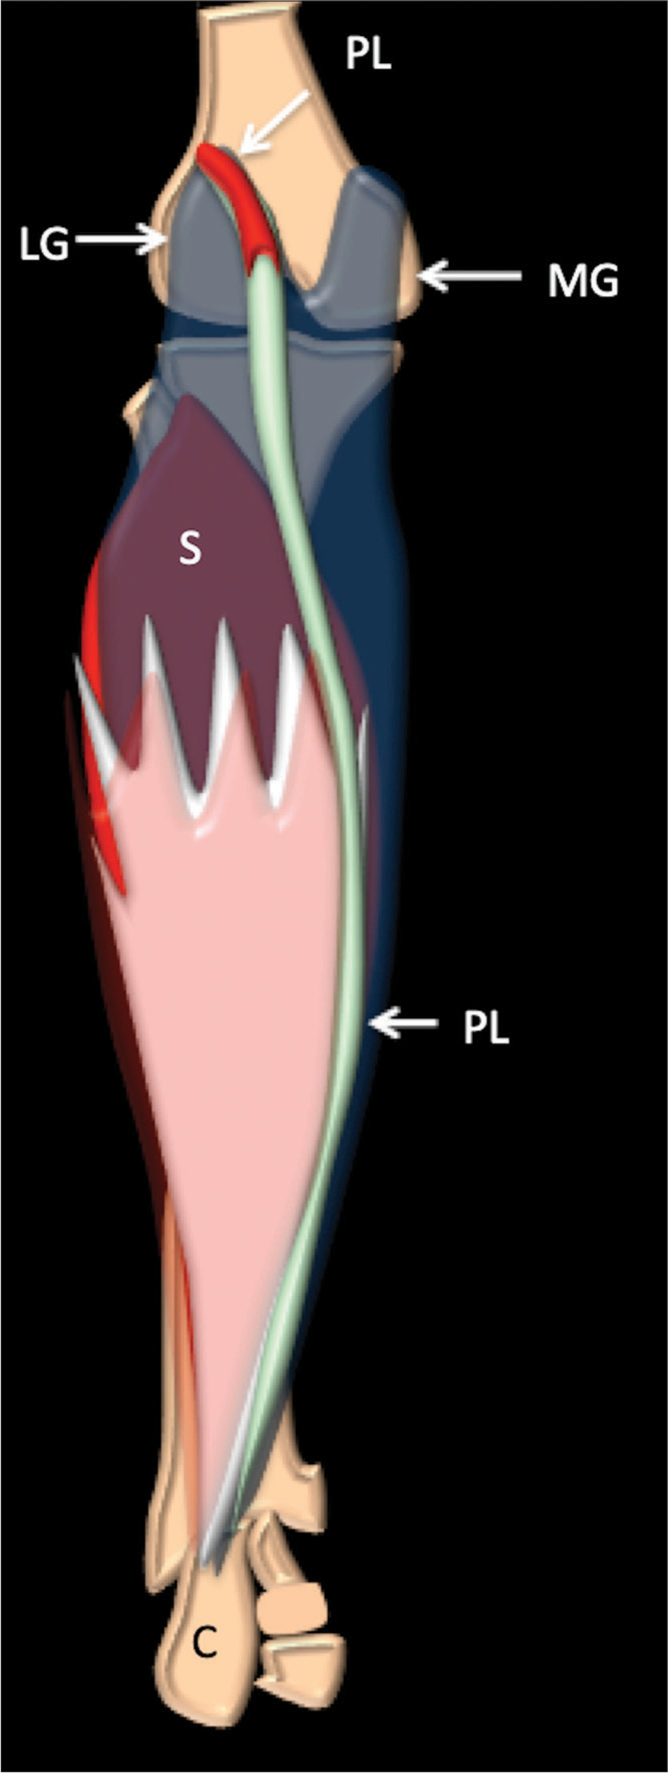 Schematic anatomy plantaris muscle, tendon, and relationships in the back of the calf. (MG: Medial gastrocnemius, LG: Lateral gastrocnemius, S: Soleus , C- calcaneum, and PL- plantaris).